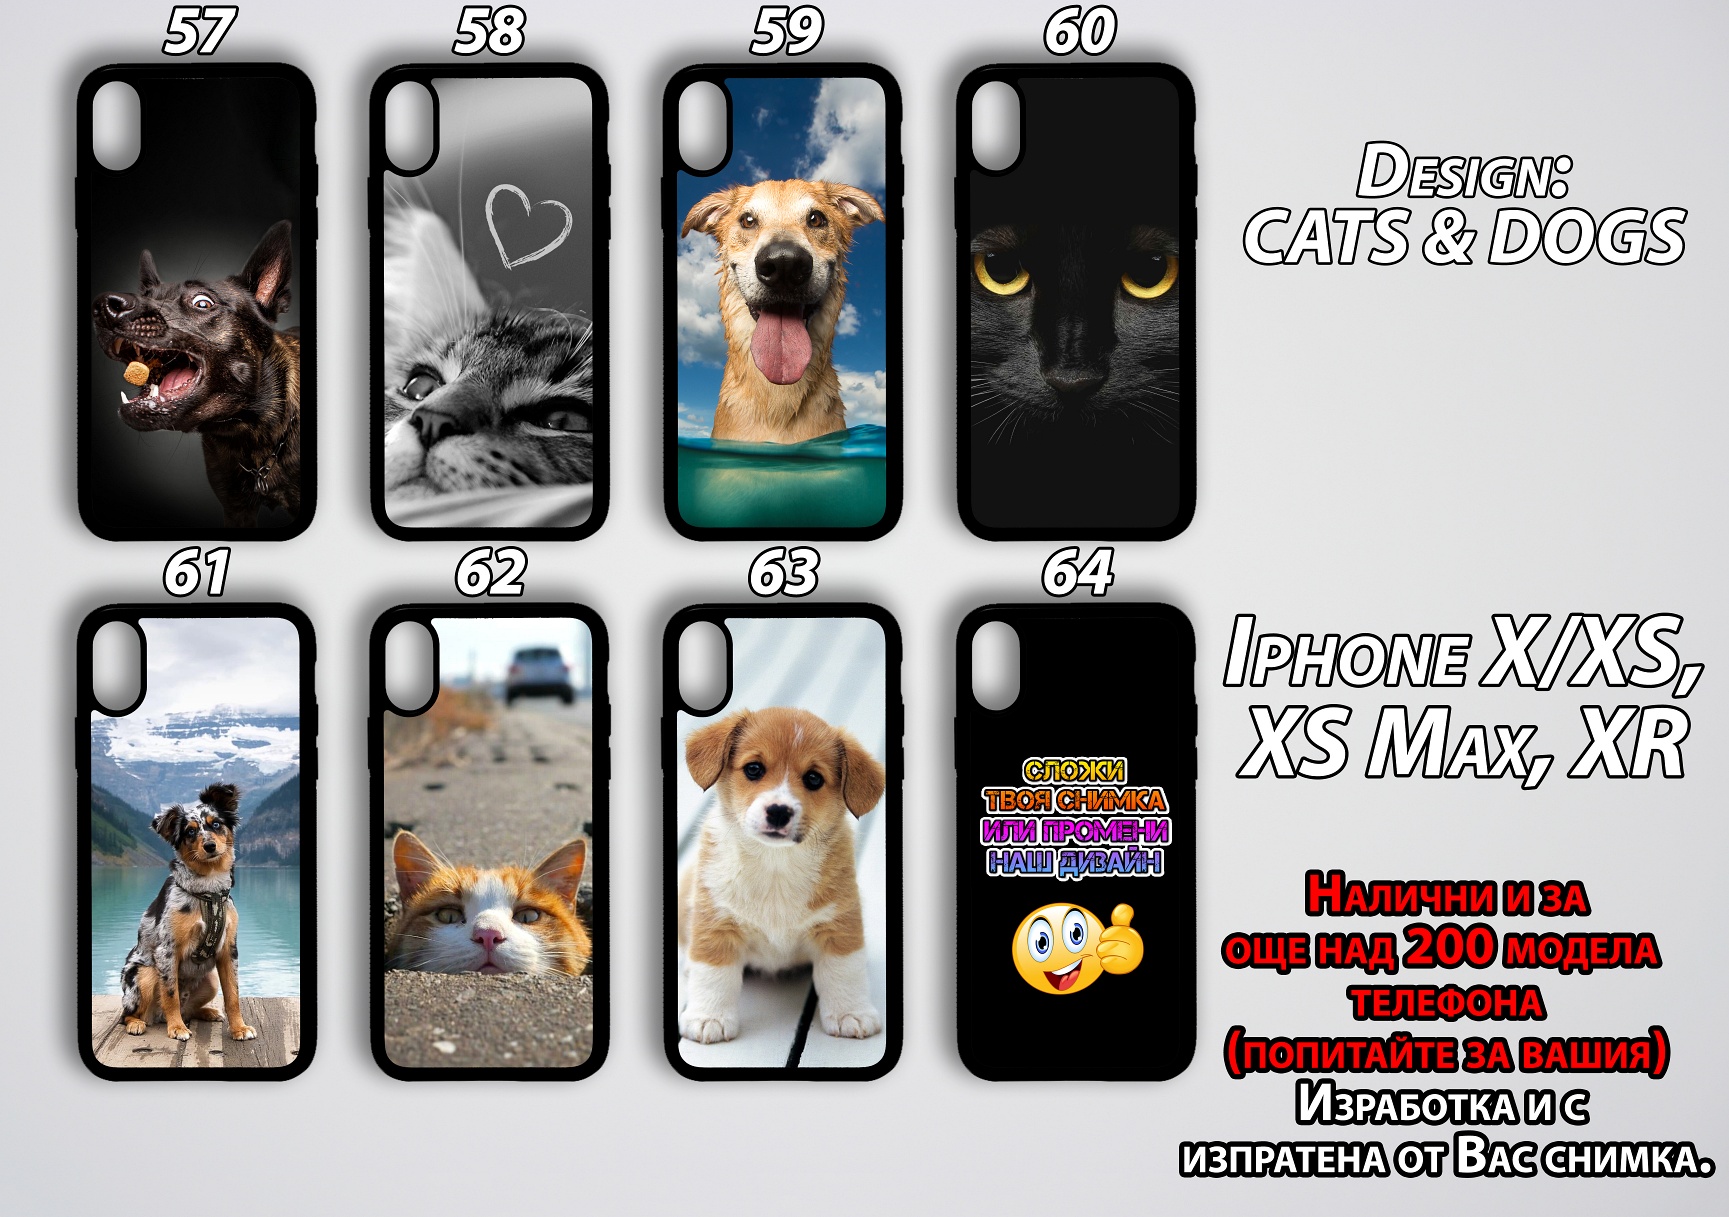 mobile phone cases NEW-Cats-and-Dogs 57